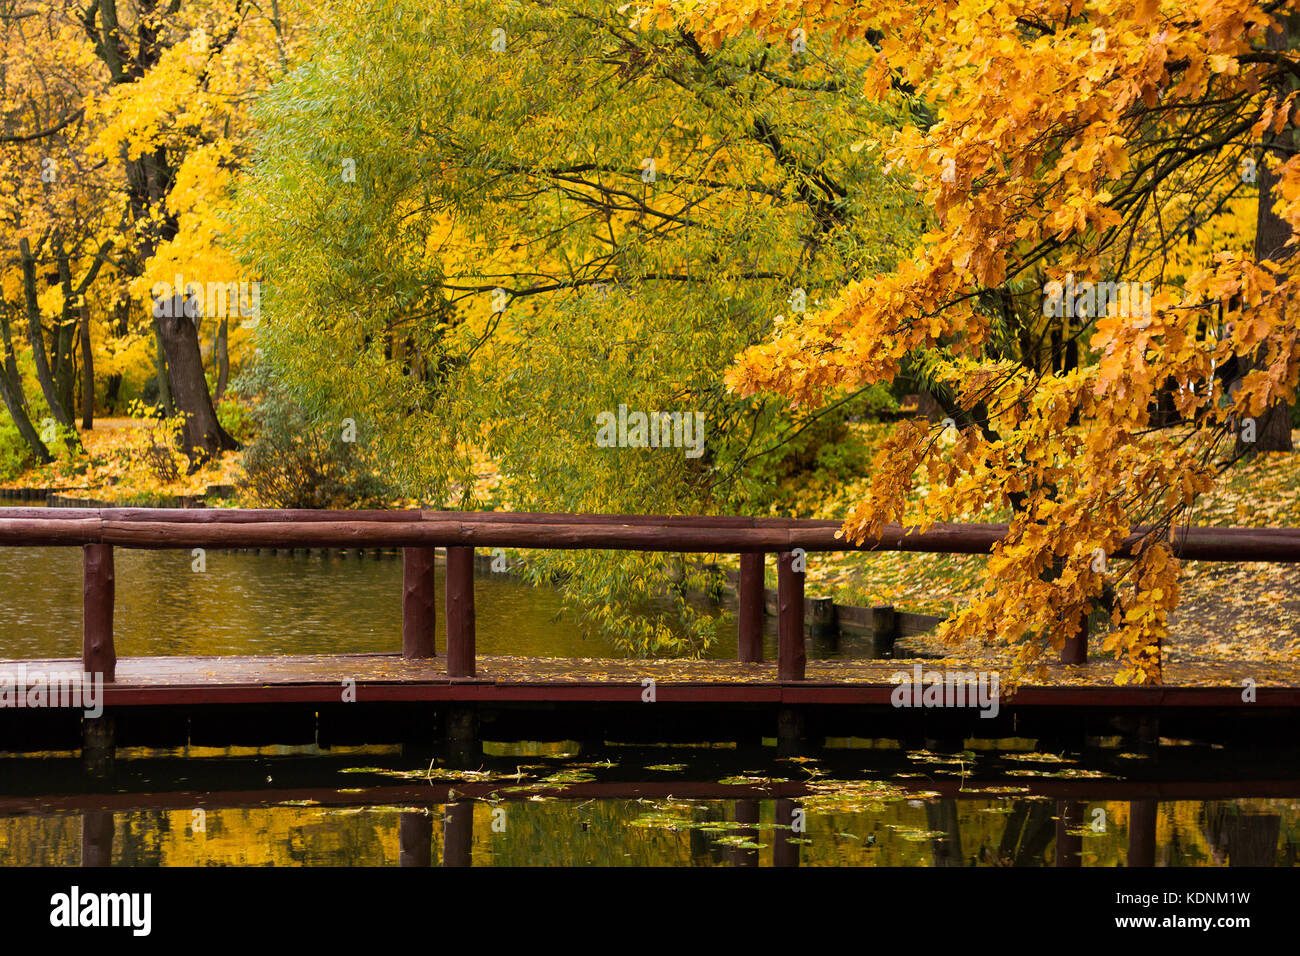 Maple and willow trees in a park by an autumn day with yellow, green and red leaves at the shore of a pond with wood bridge crossing it. Stock Photo